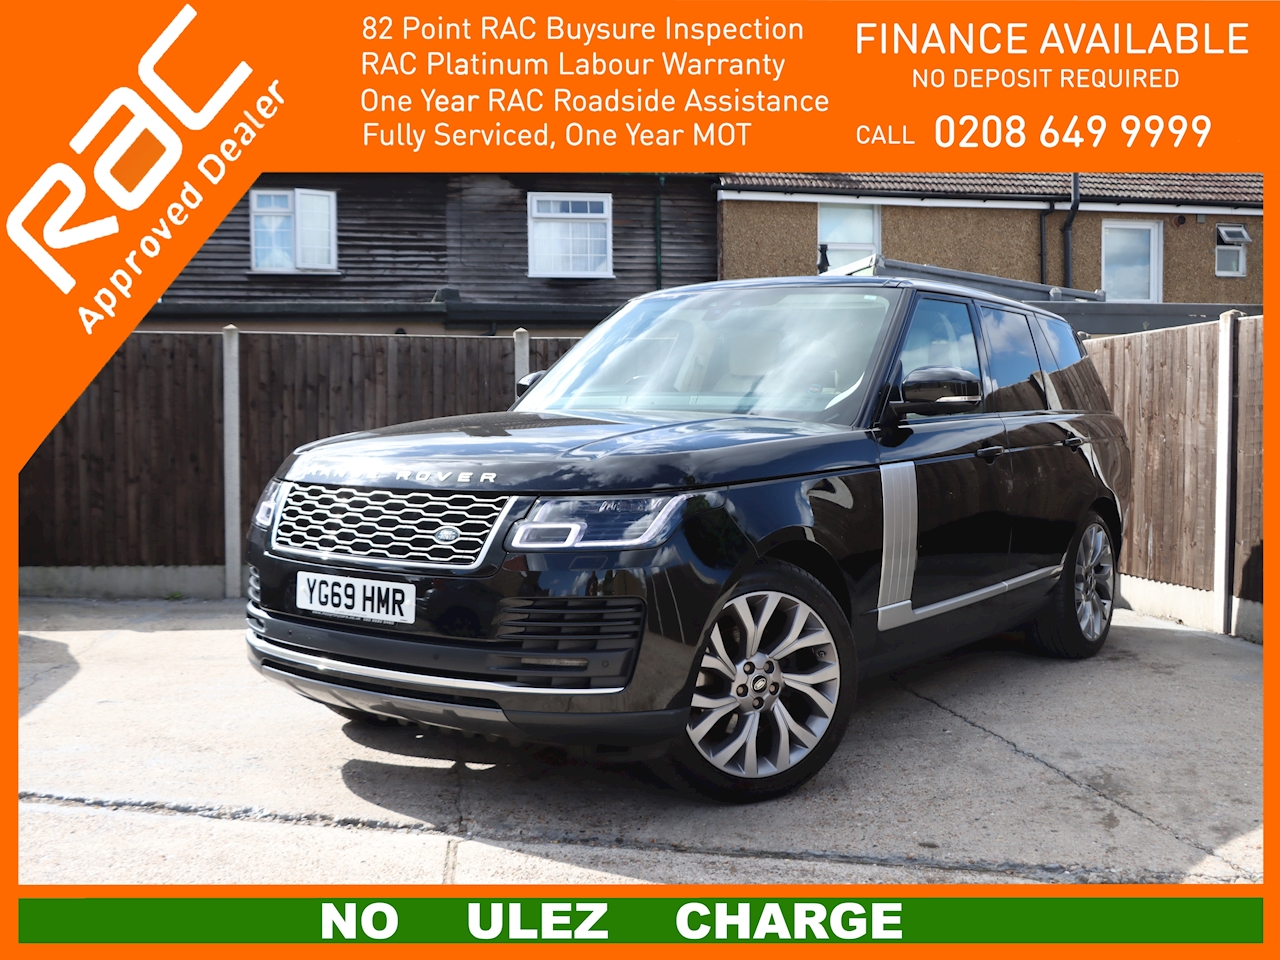 3.0 SD V6 WESTMINSTER SUV 5DR DIESEL 4WD AUTO PANORAMIC SUNROOF HEATED SEATS SATNAV APPLE CARPLAY REVERSING CAMERA 1 OWNER FROM NEW 56000 MILES FSH